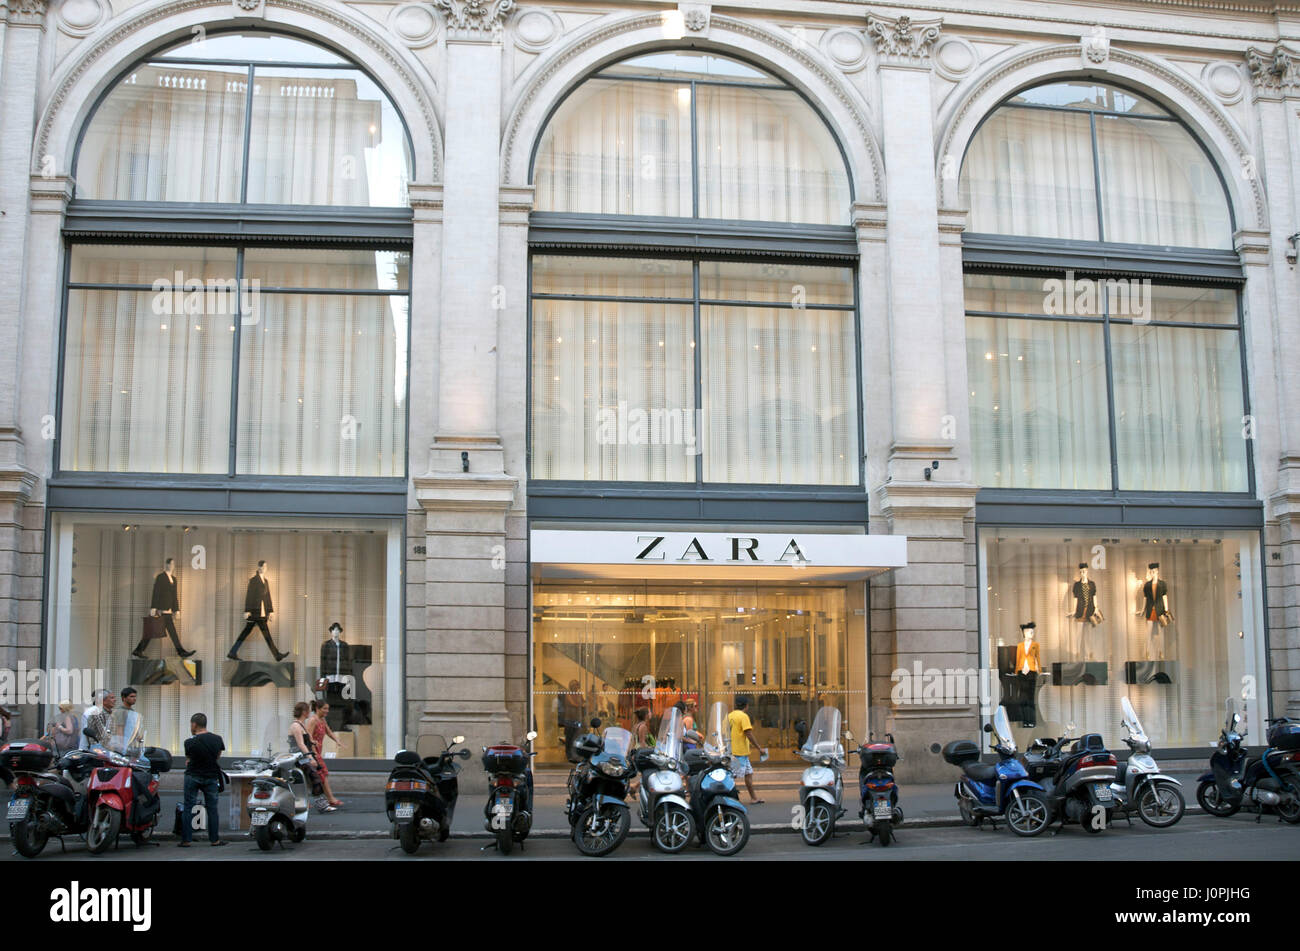 Zara Italy High Resolution Stock Photography and Images - Alamy